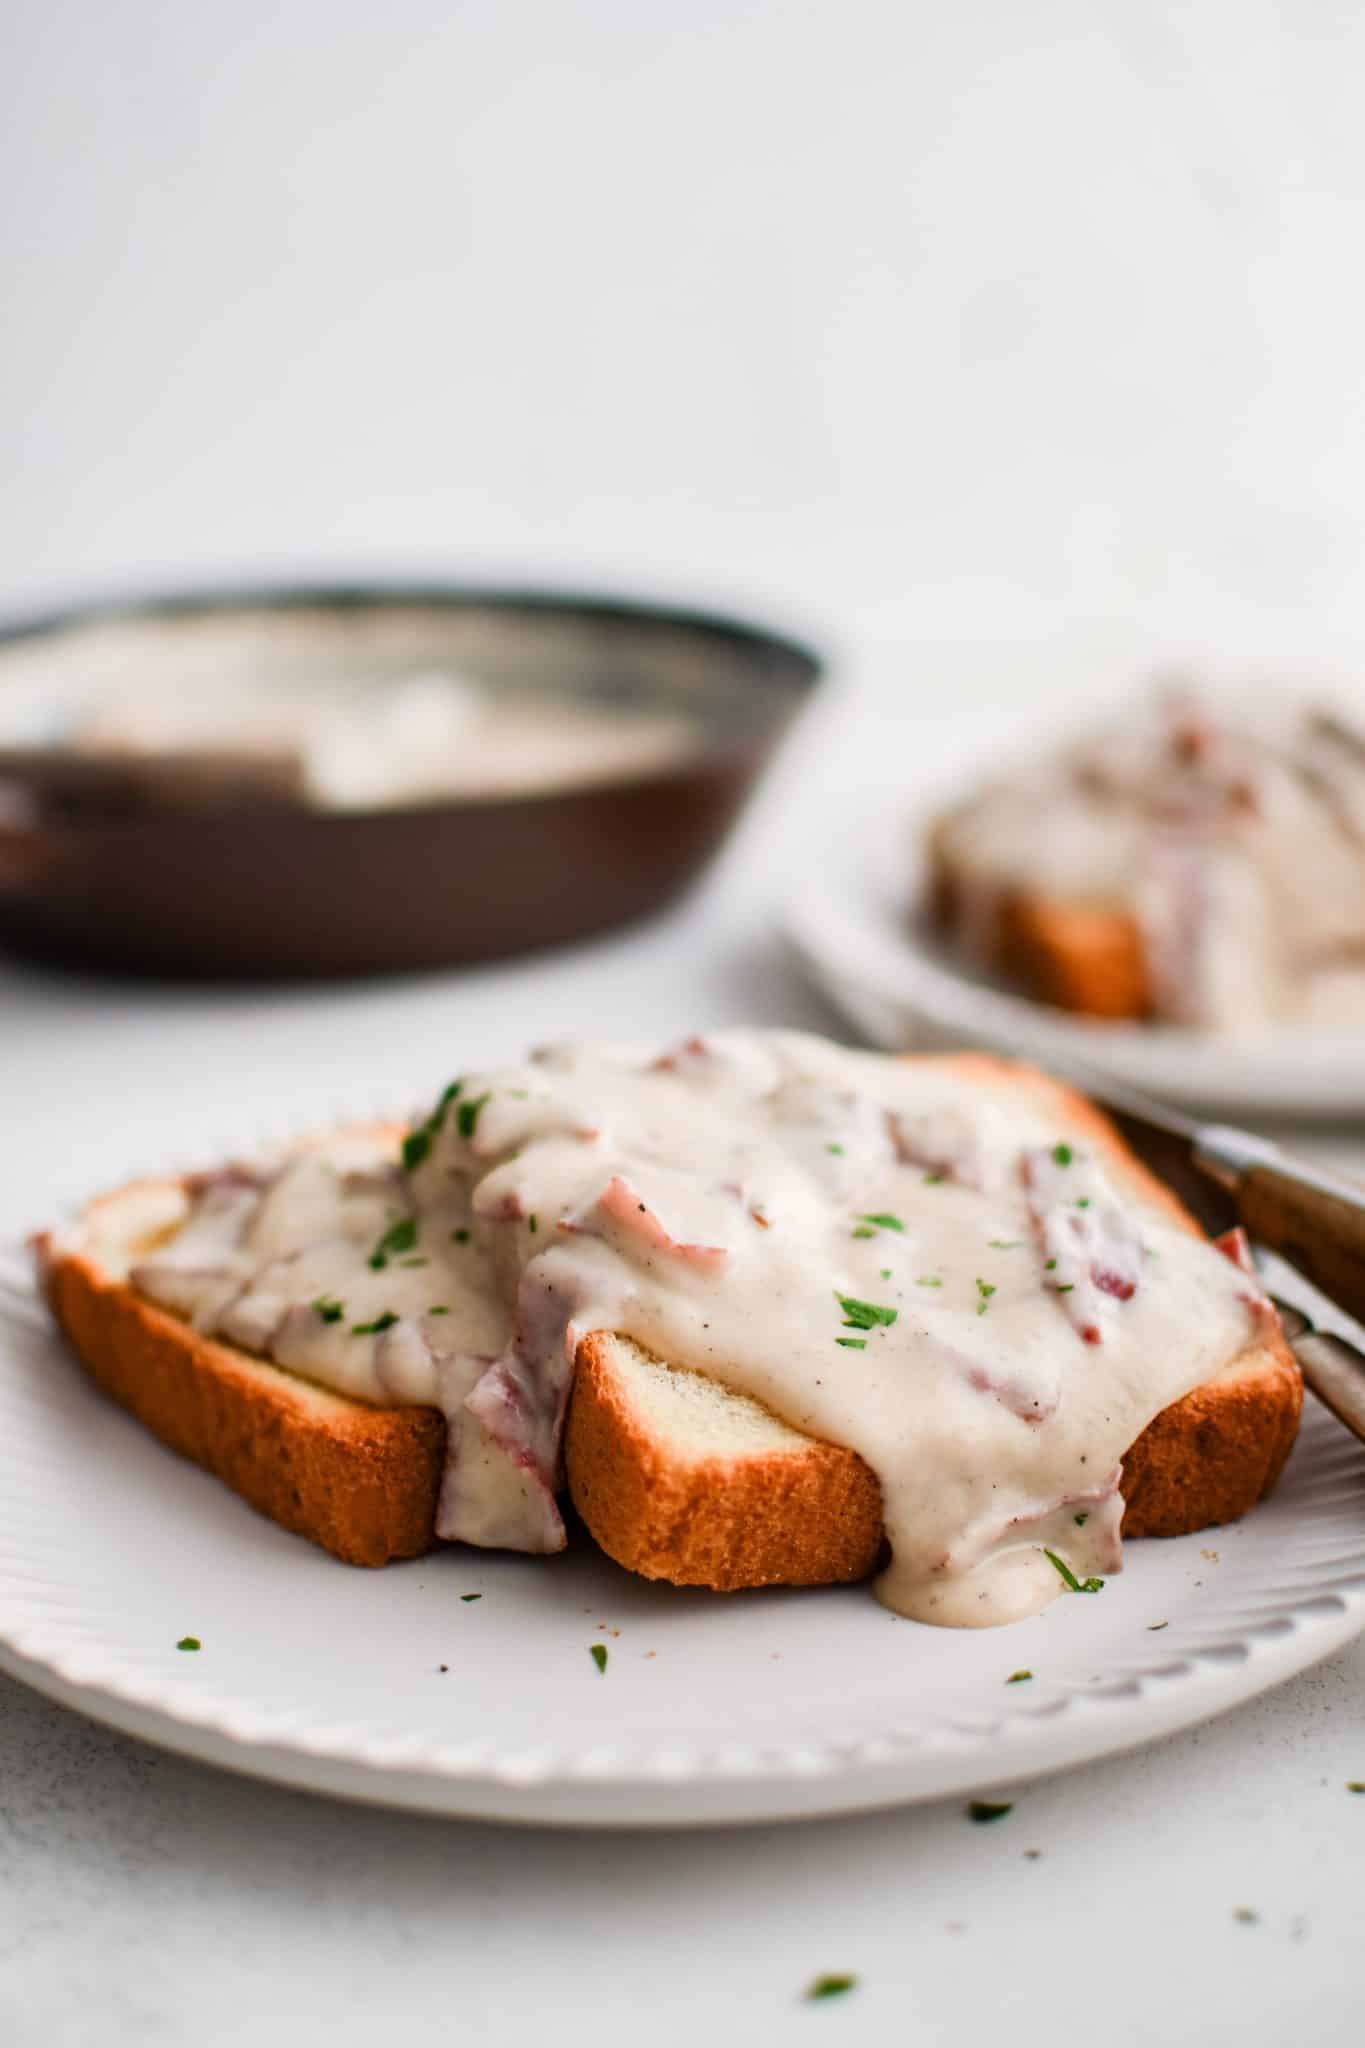 Two slices of golden toasted bread on a white plate topped with a generous serving of creamed chipped beef spilled over the sides and garnished with fresh parsley with the cast iron skillet filled with the remain creamed chipped beef in the background.